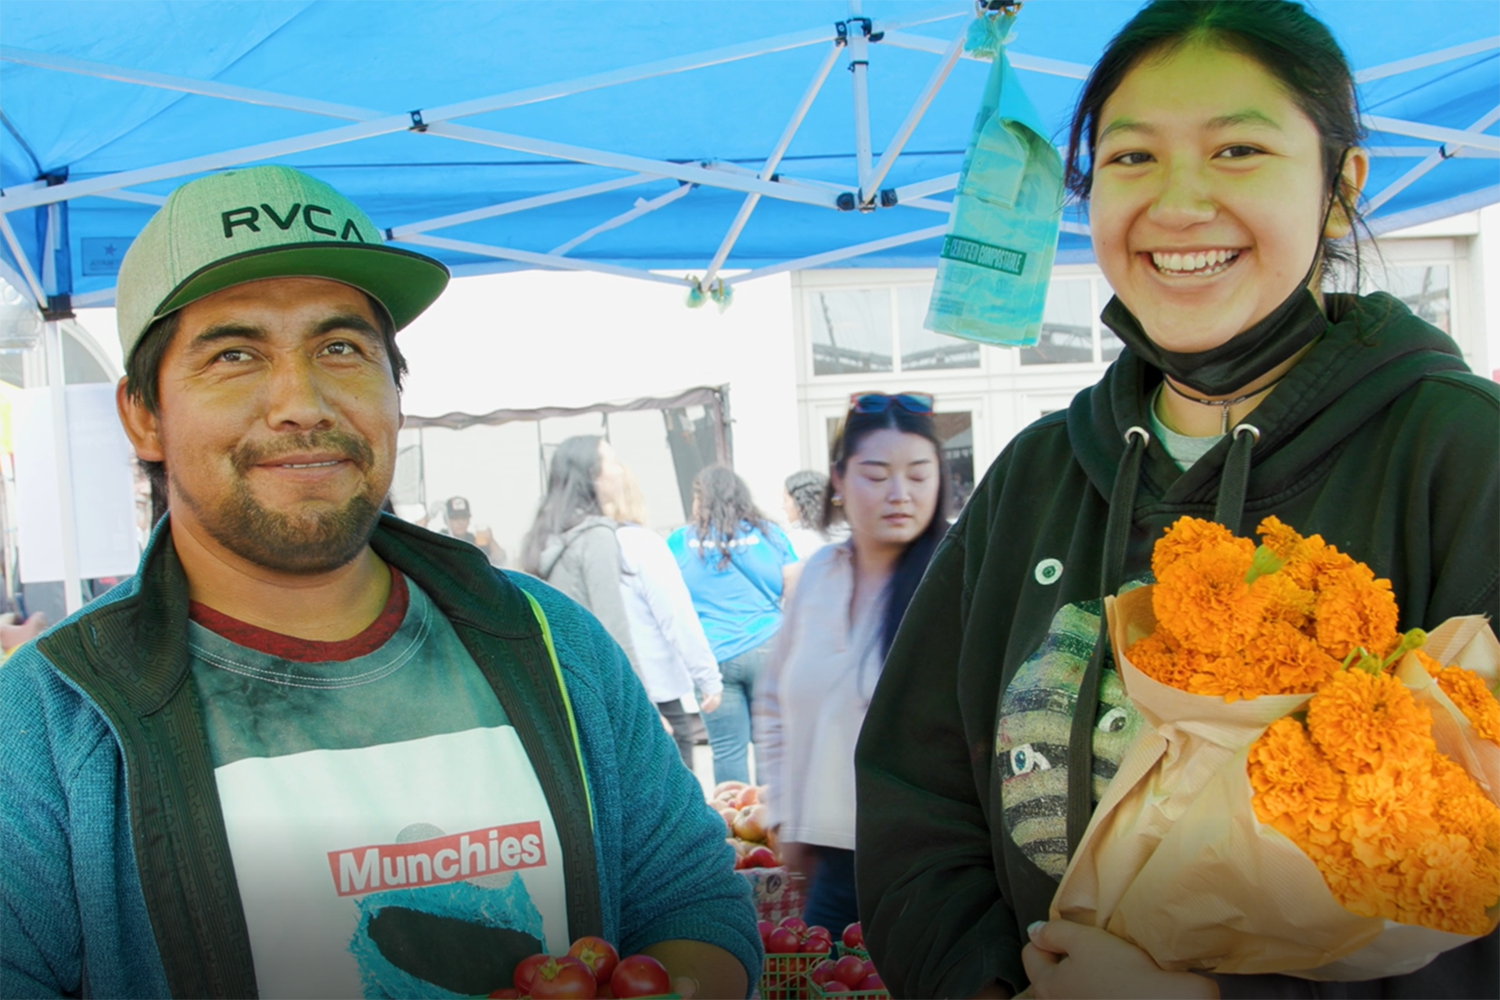 Farmer Modesto Sanchez and Foodwise Teens participant Luzaneth Garcia at the Oya Organics stand at the Ferry Plaza Farmers Market